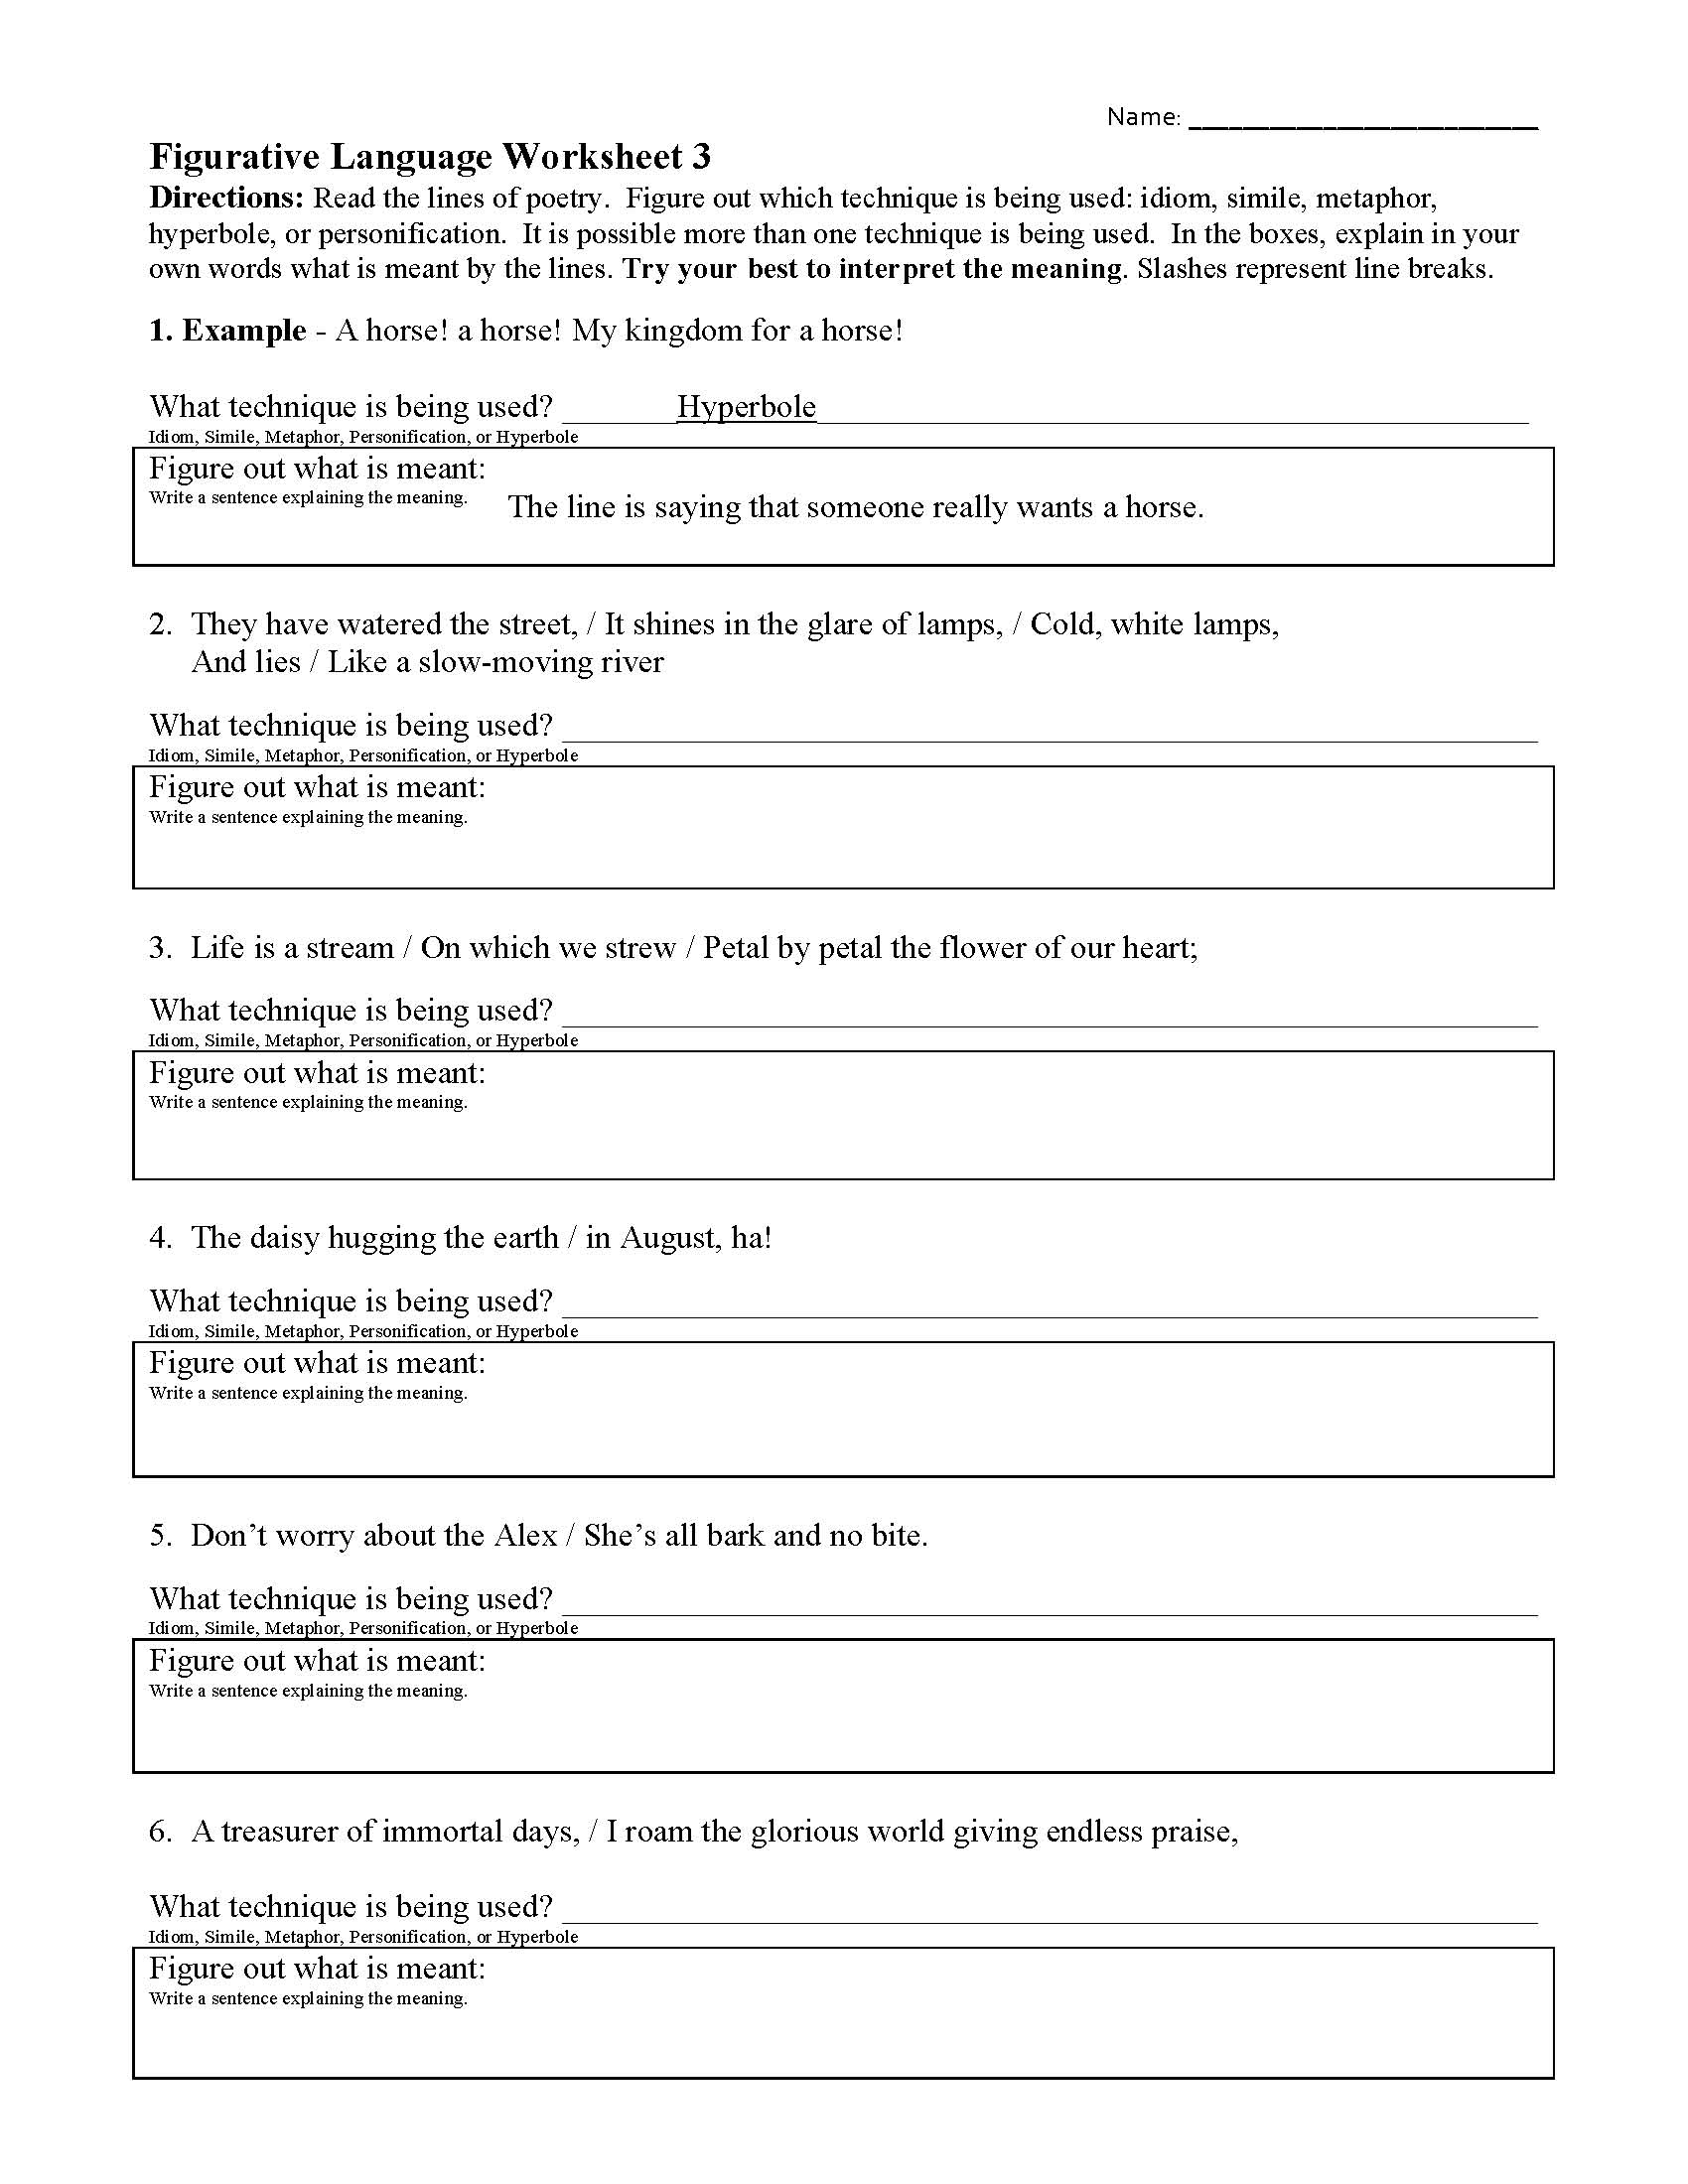 This is a preview image of Figurative Language Worksheet 3. Click on it to enlarge it or view the source file.